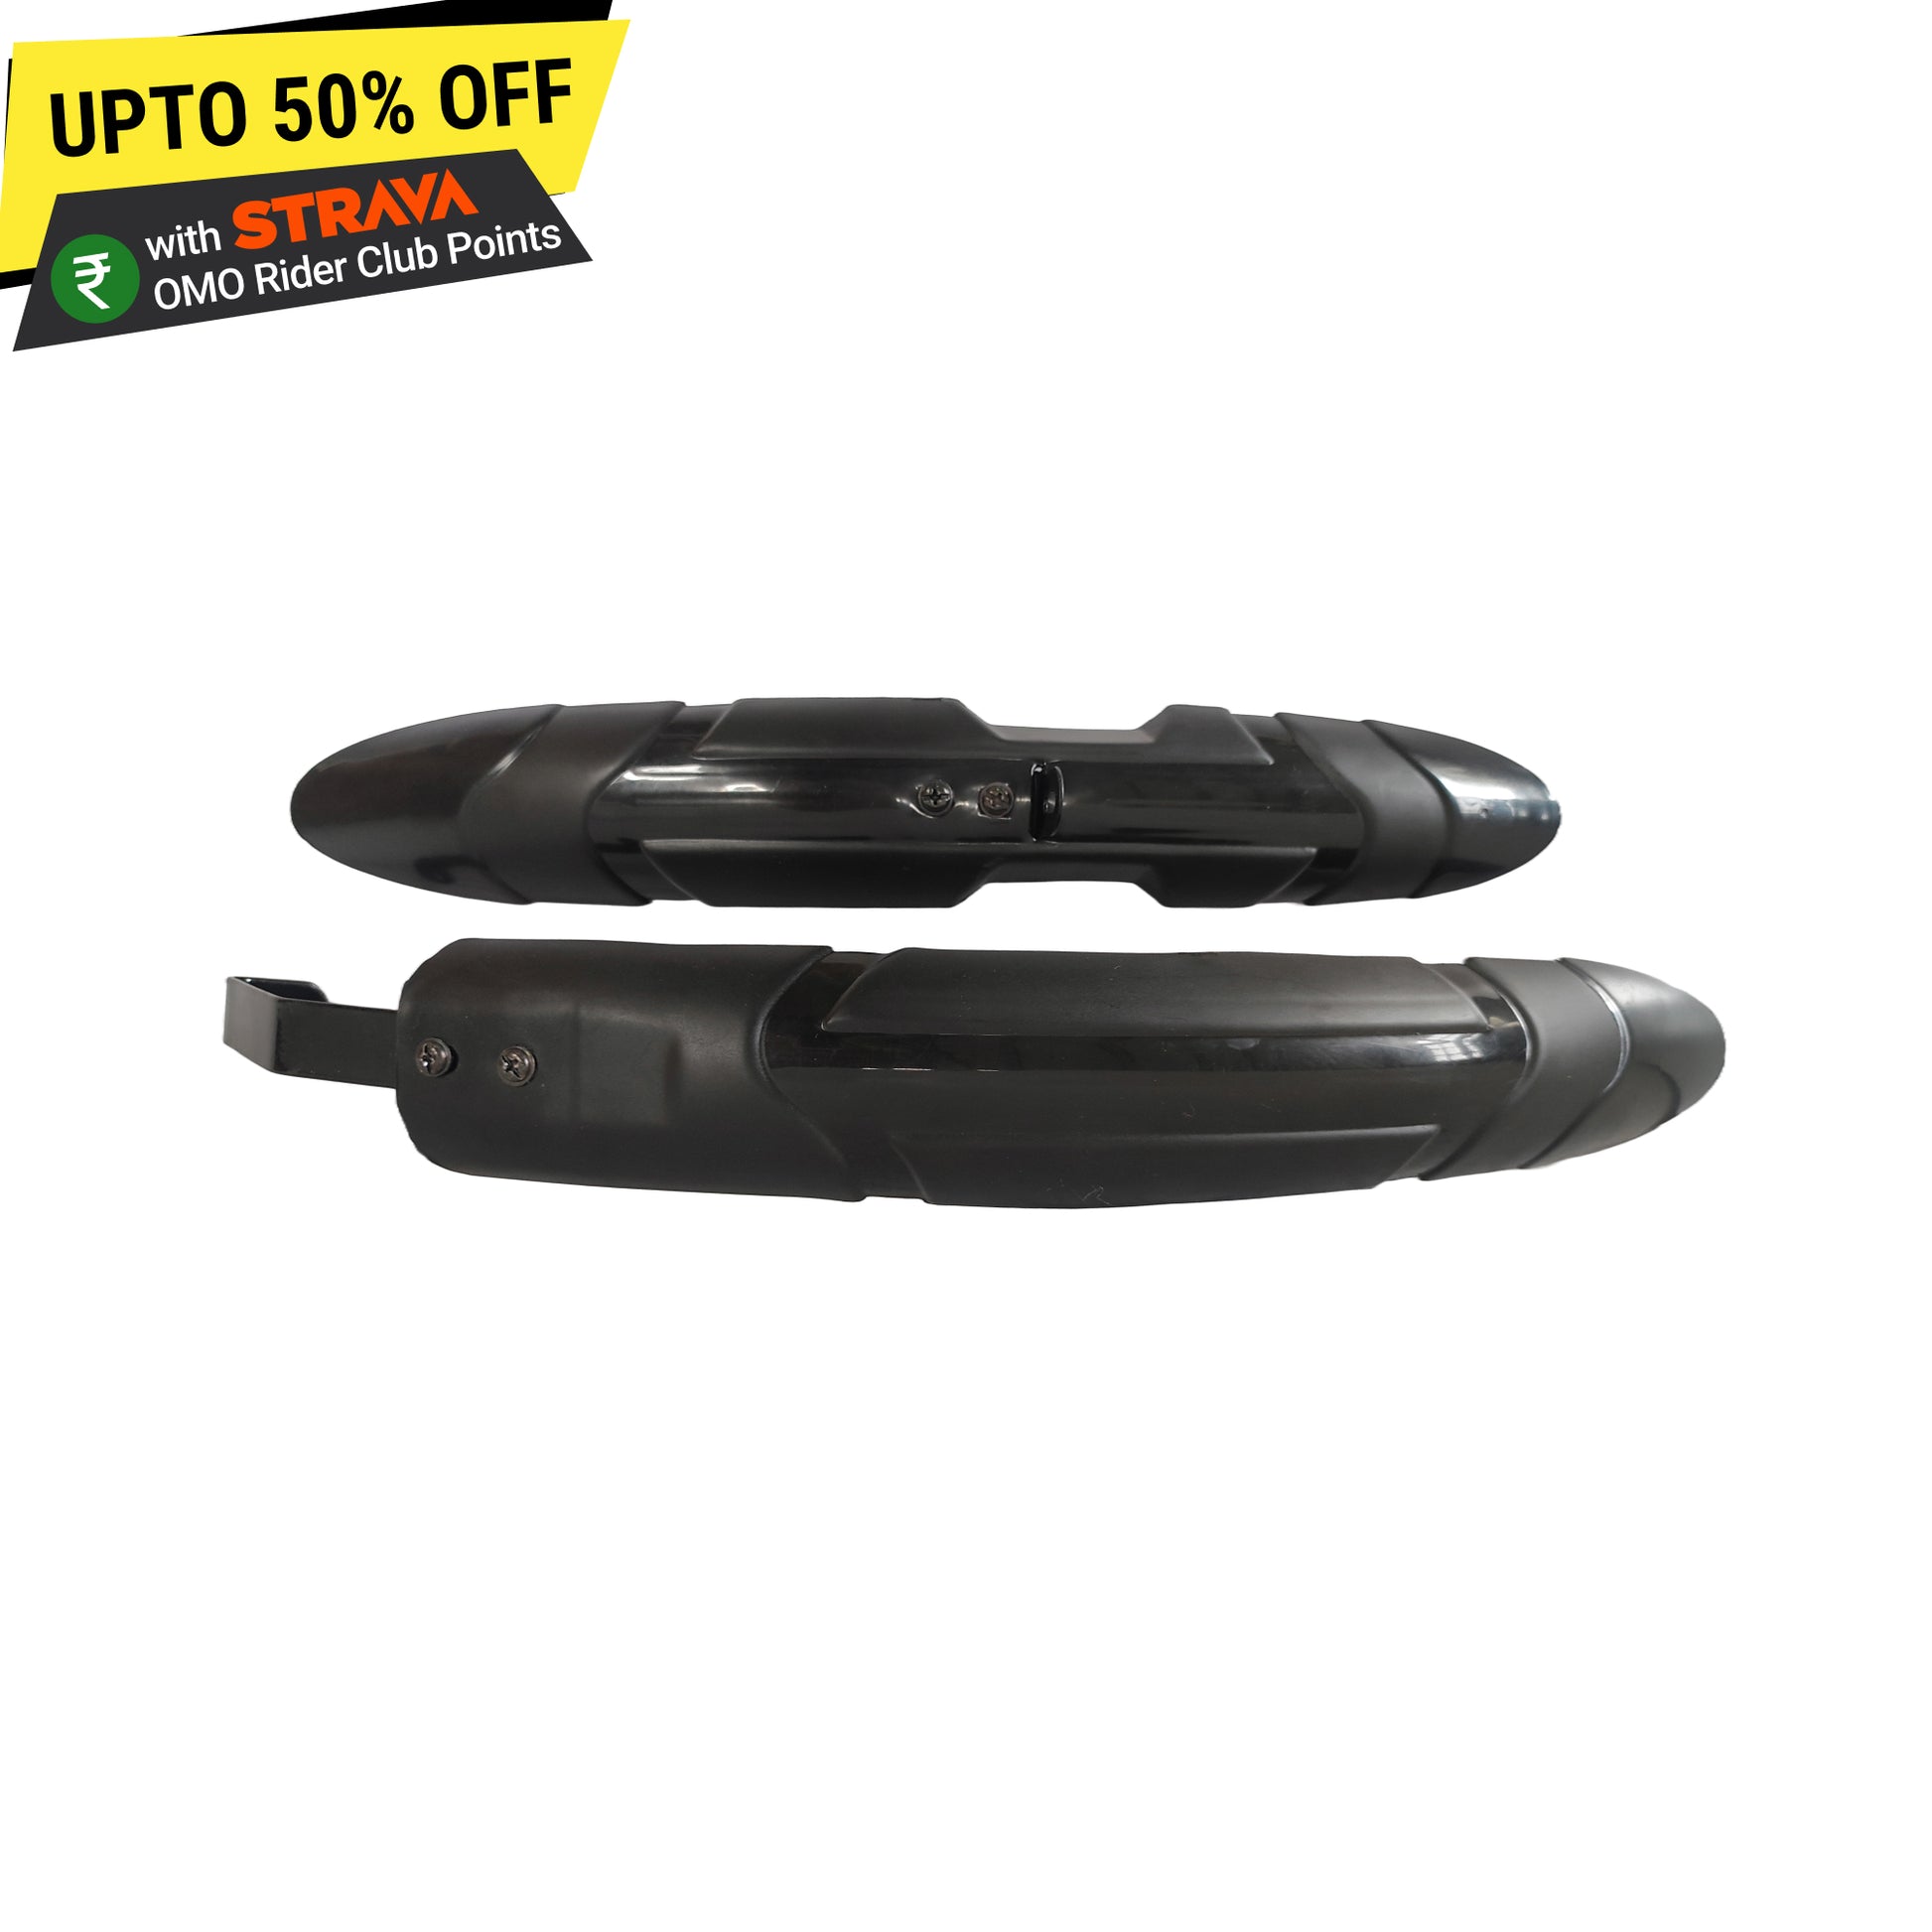 Buy Online Mudguard for Bicycle, Fit all Bicycle